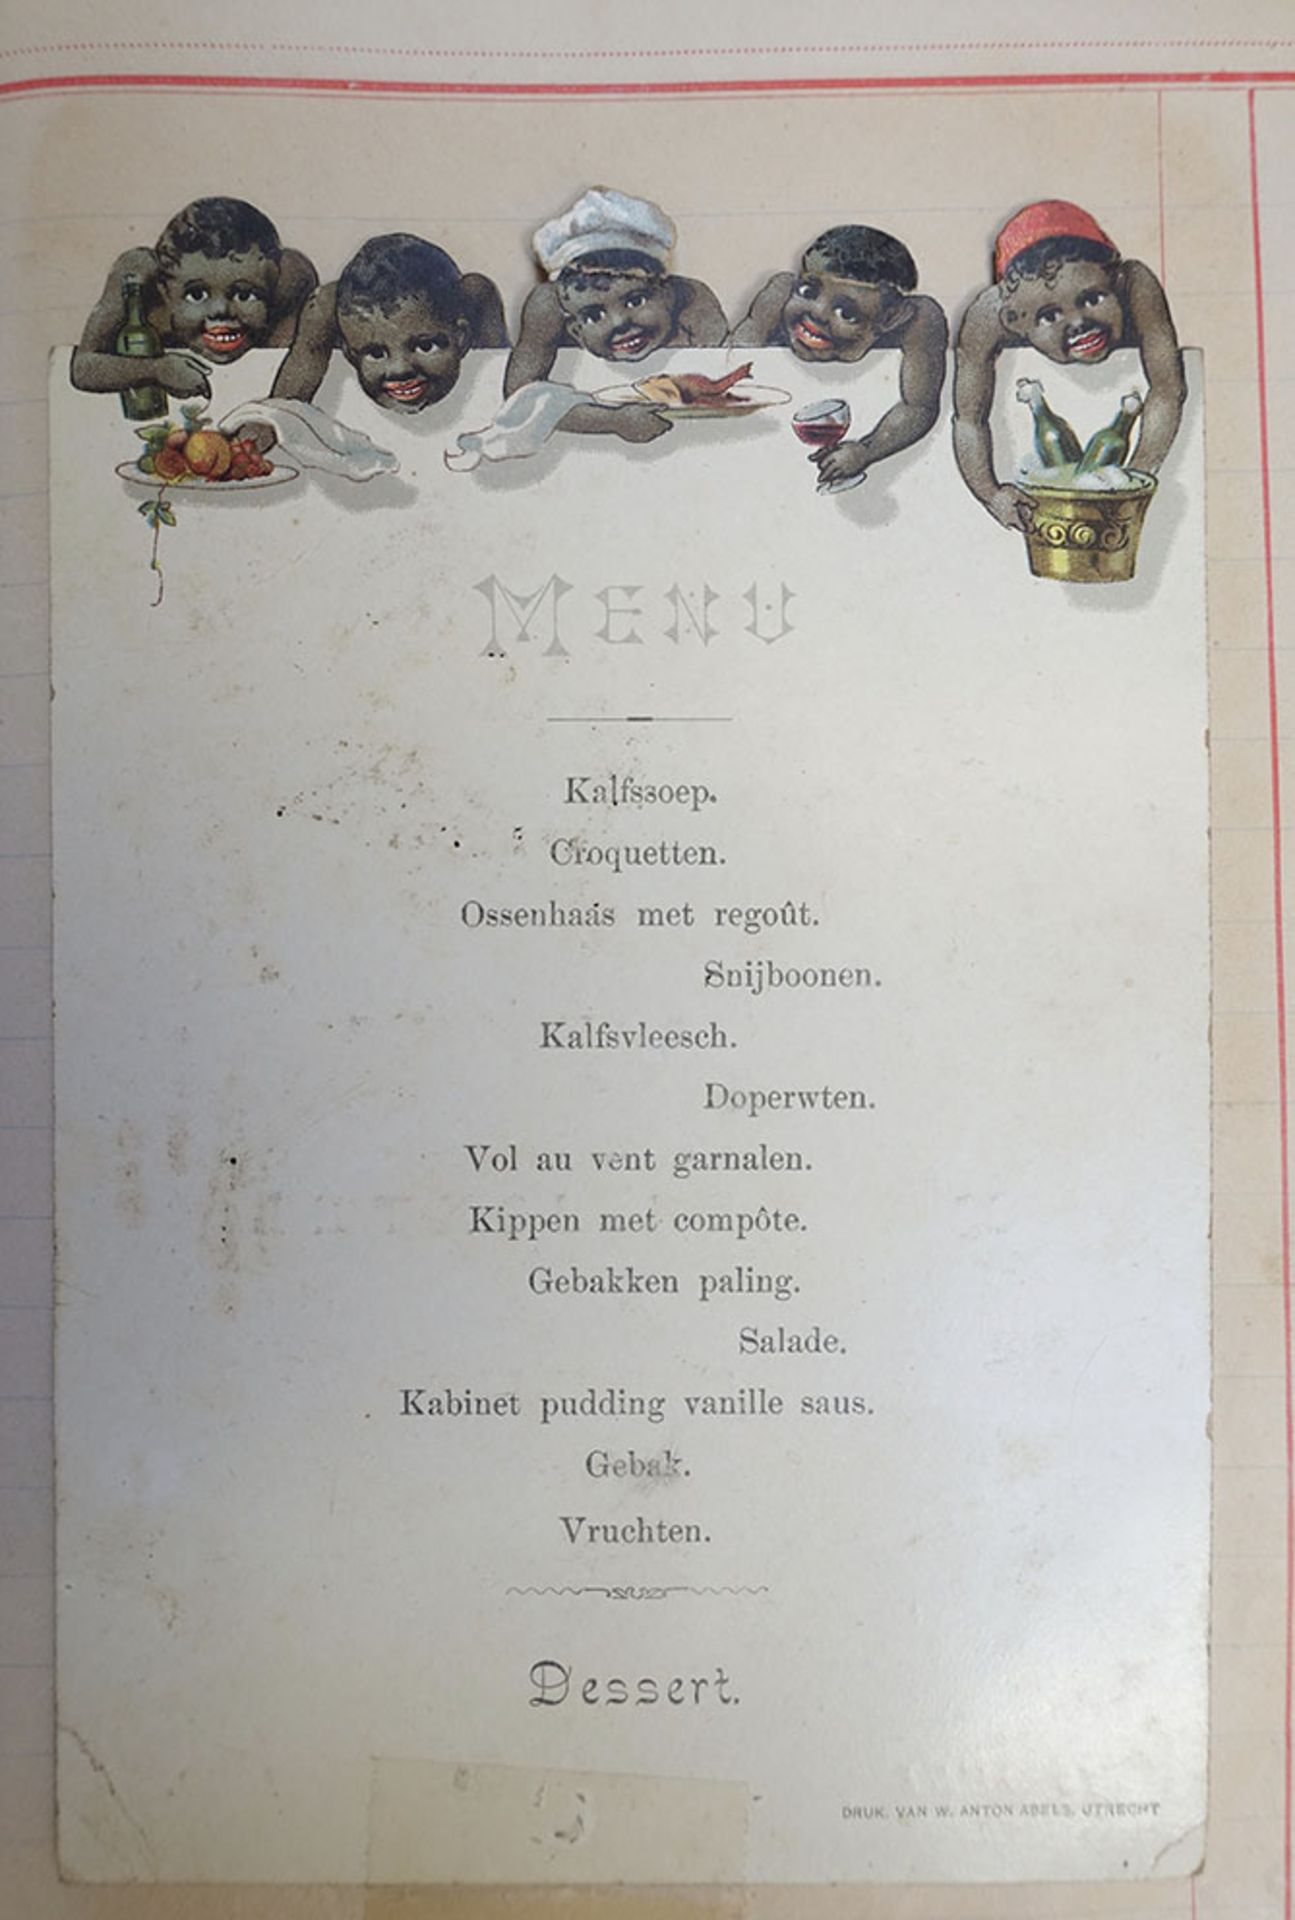 MENU CARDS -- COLLECTION OF ± 125 MENU CARDS from the period 1884-1901 'composed' by Lambertus